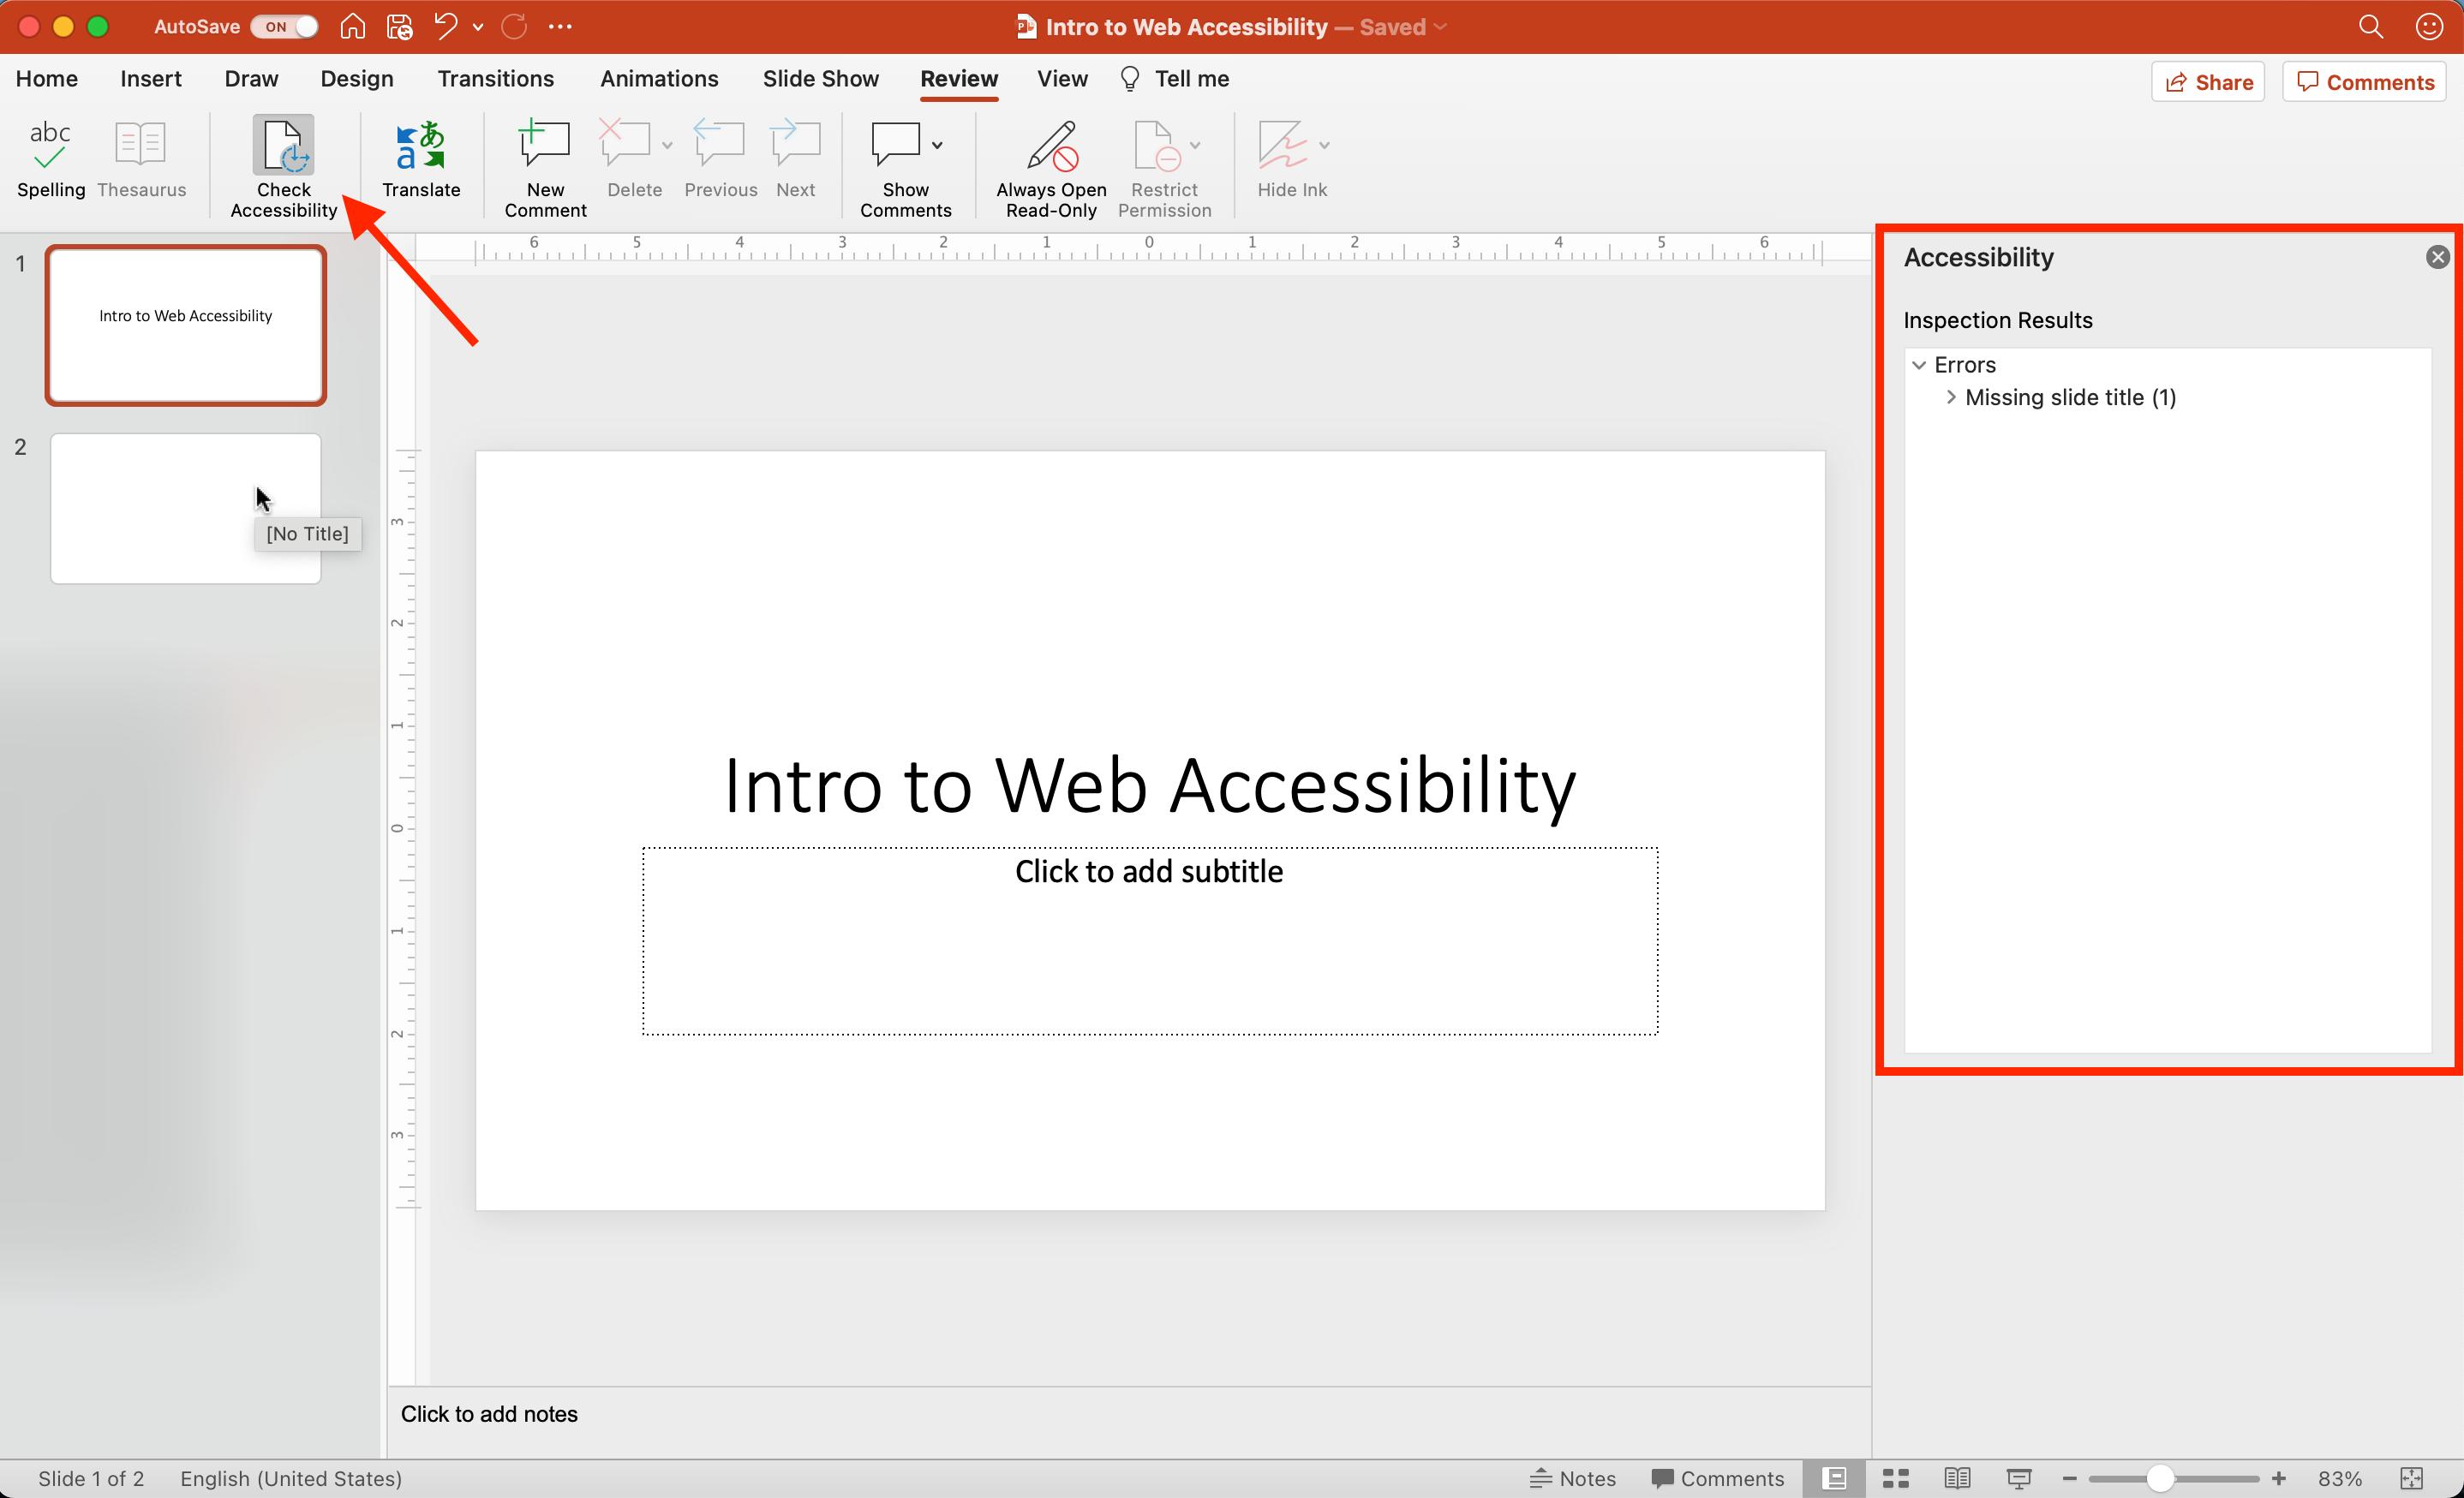 The Check Accessibility menu option is activated on a simple PowerPoint deck where one slide is missing a title. The Accessibility pane shows the 'Missing slide title' error and the mouse hover text for that slide also reads '[No Title]'.